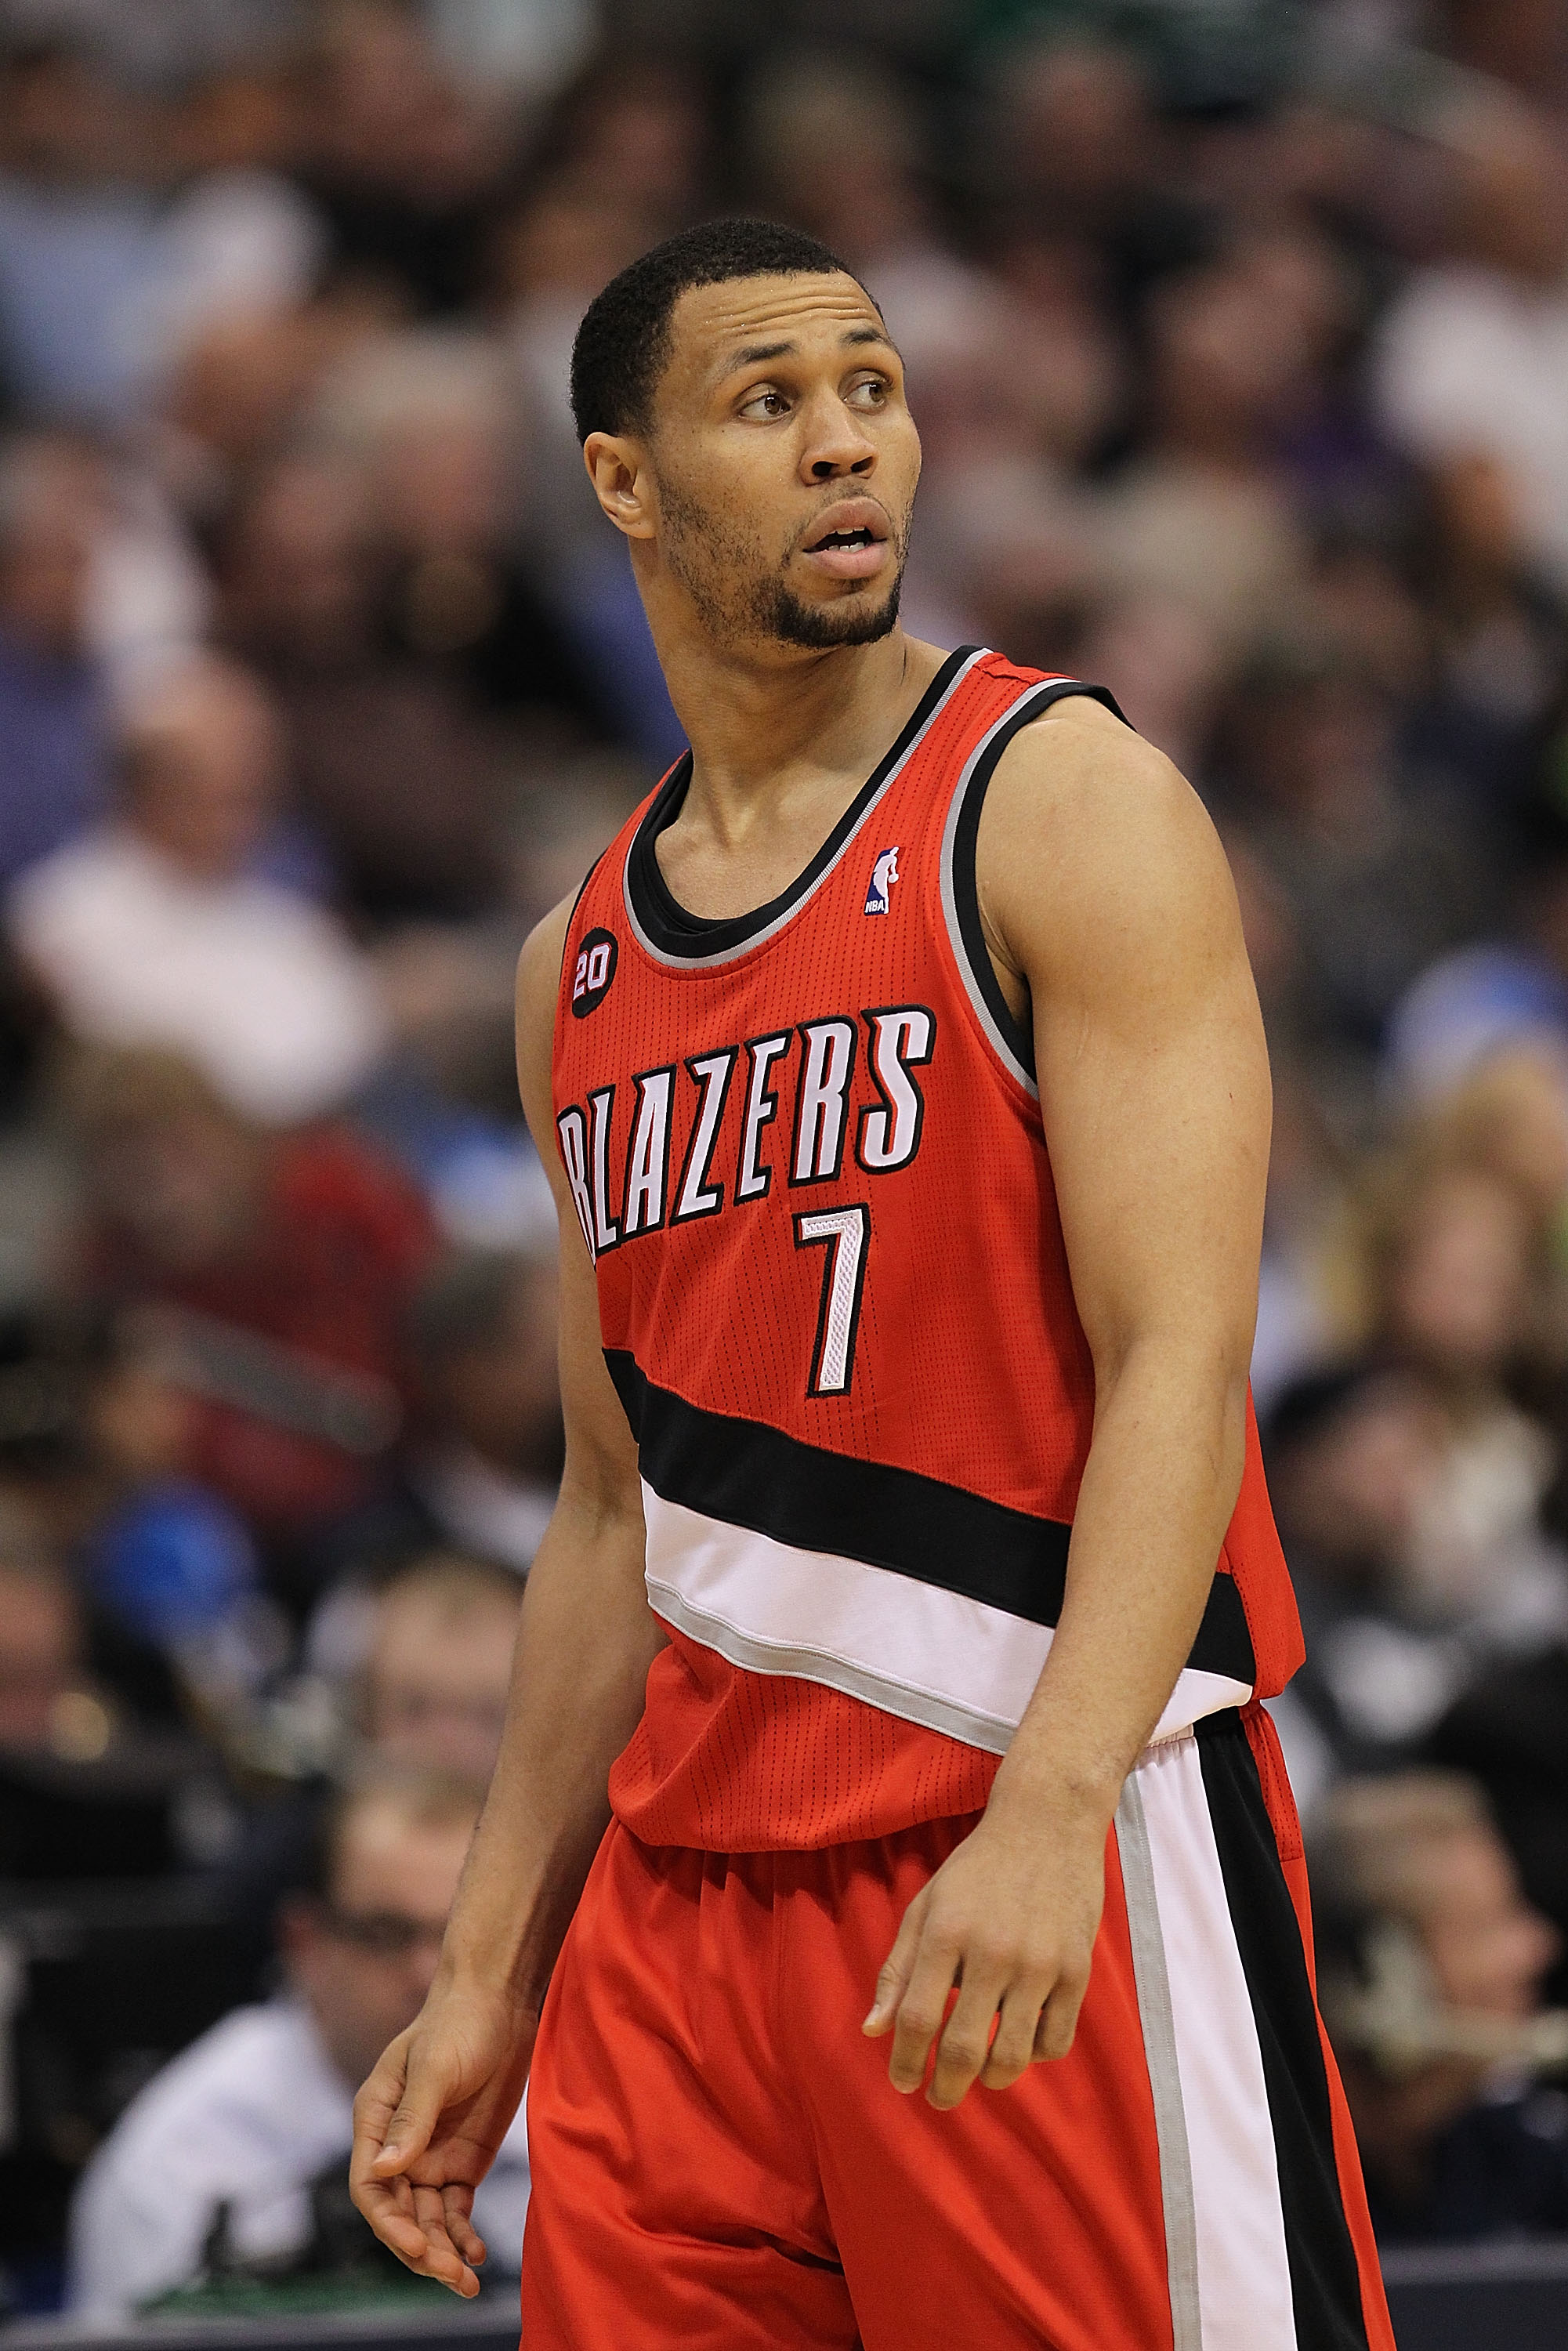 DALLAS, TX - DECEMBER 15:  Guard Brandon Roy #7 of the Portland Trail Blazers at American Airlines Center on December 15, 2010 in Dallas, Texas.  NOTE TO USER: User expressly acknowledges and agrees that, by downloading and or using this photograph, User